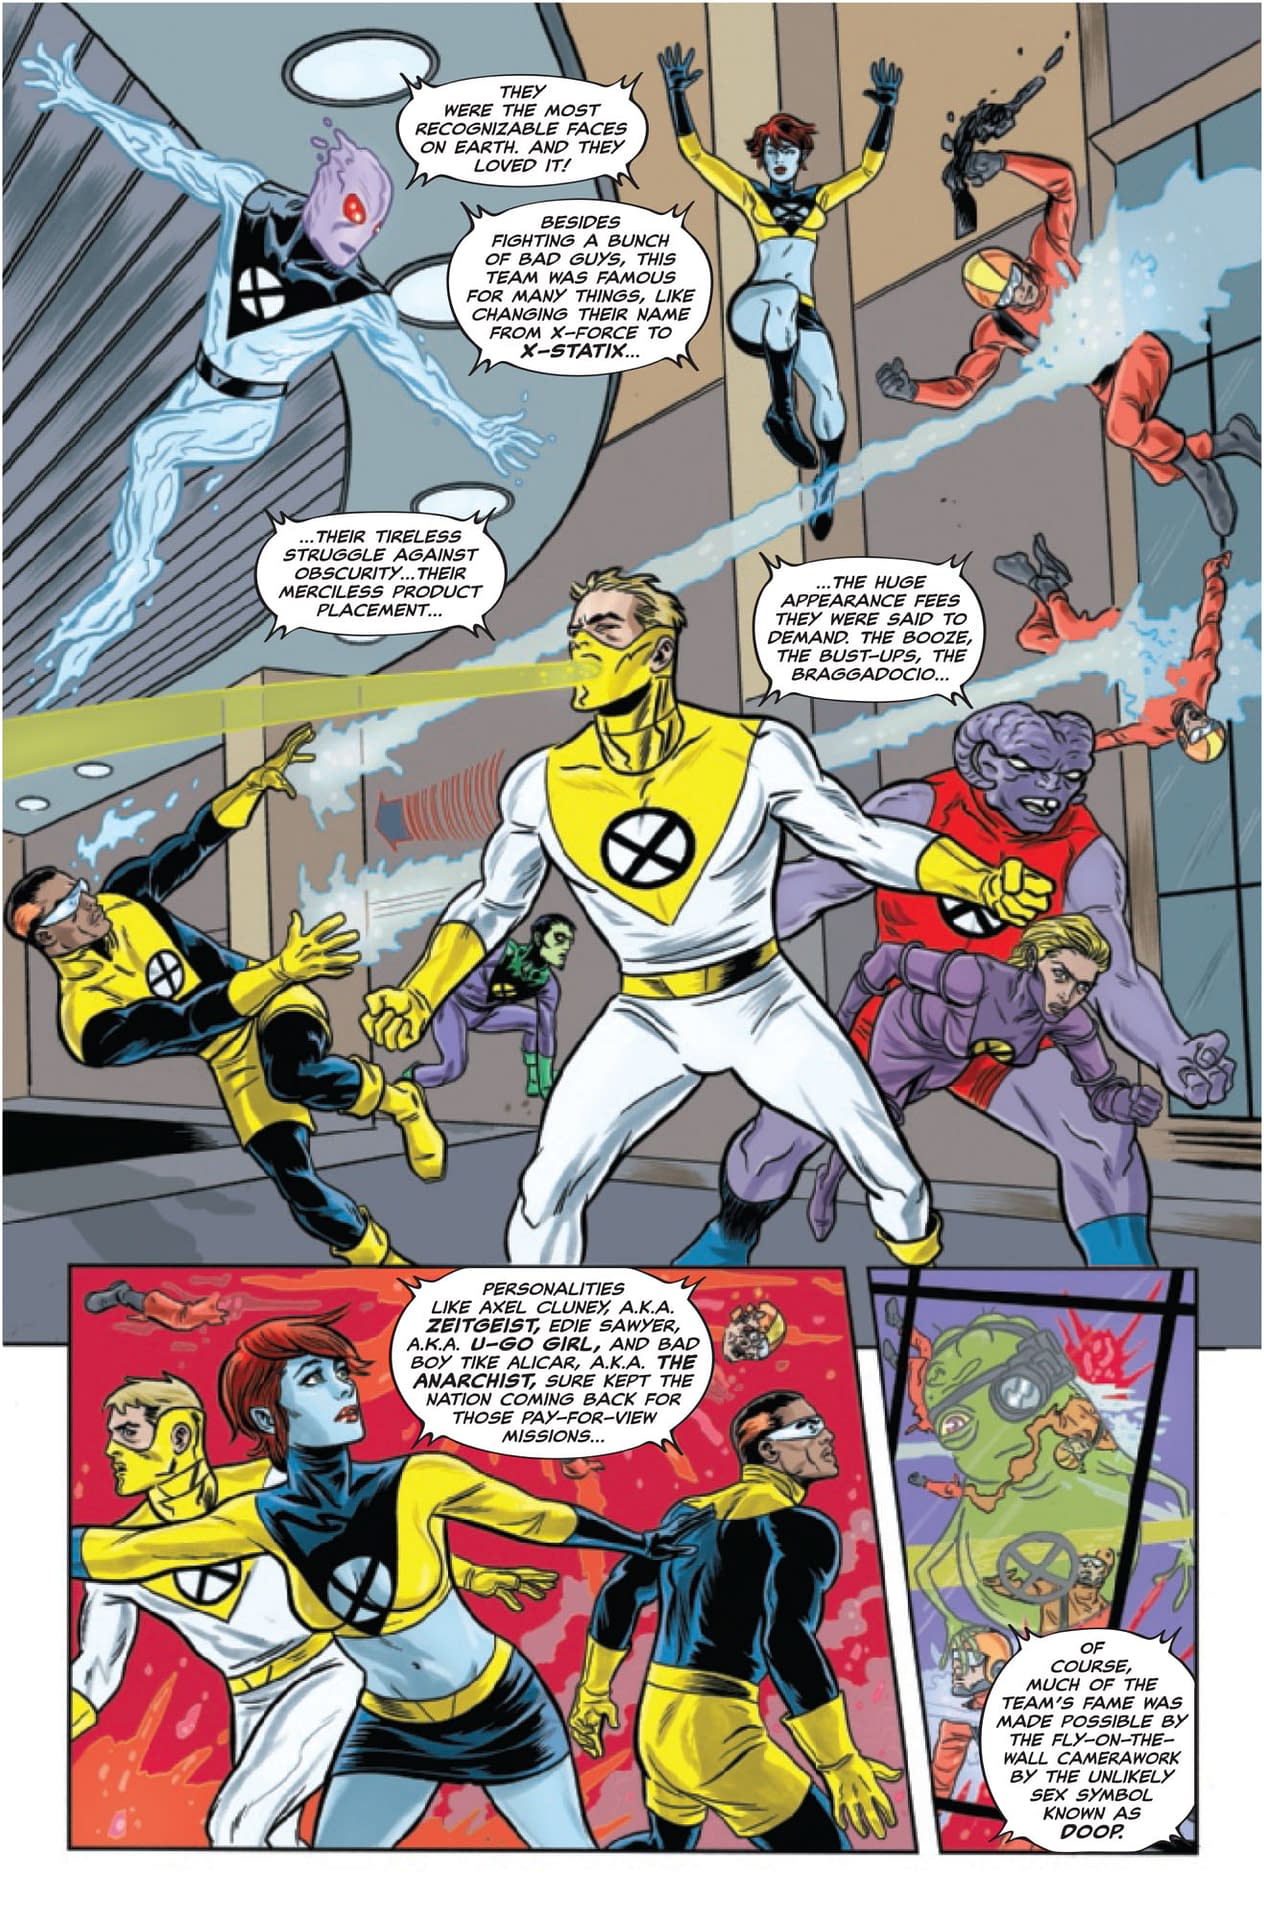 Will Giant-Size X-Statix #1 Revive the Team?! [Preview]